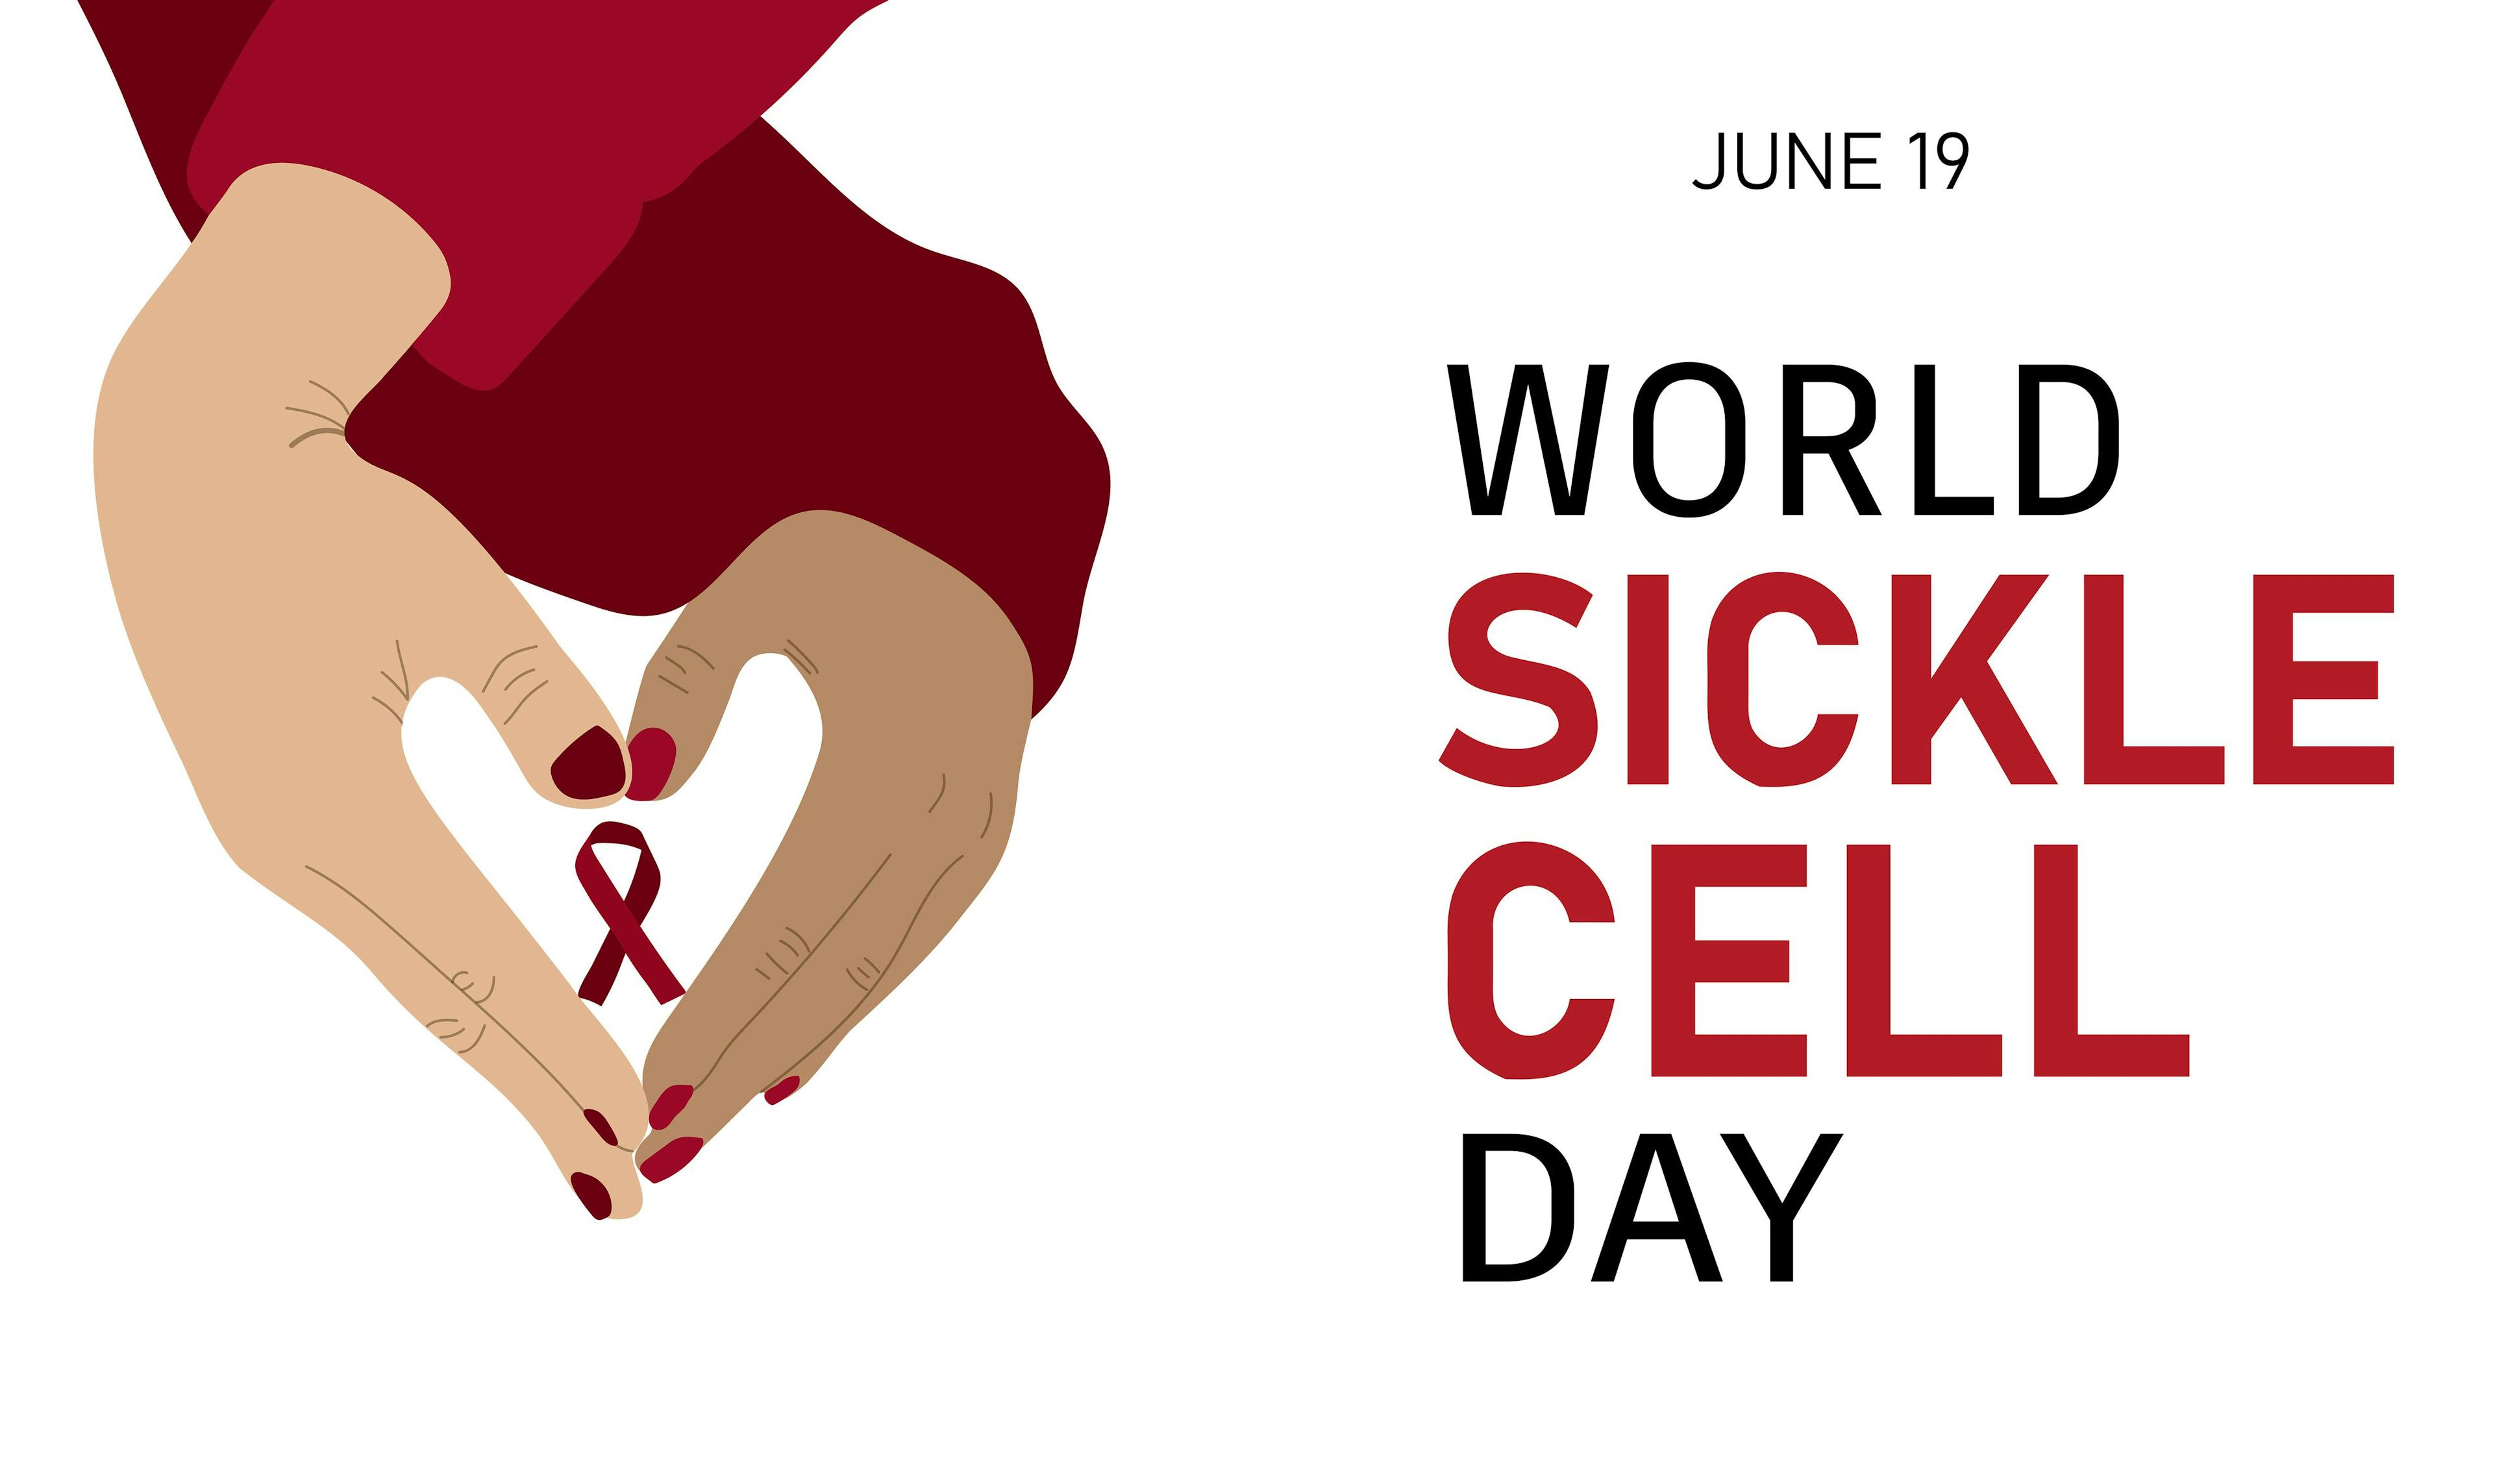 World Sickle Cell Awareness Day was established on June 19, 2009 | image credit: SaturnO_27 - stock.adobe.com